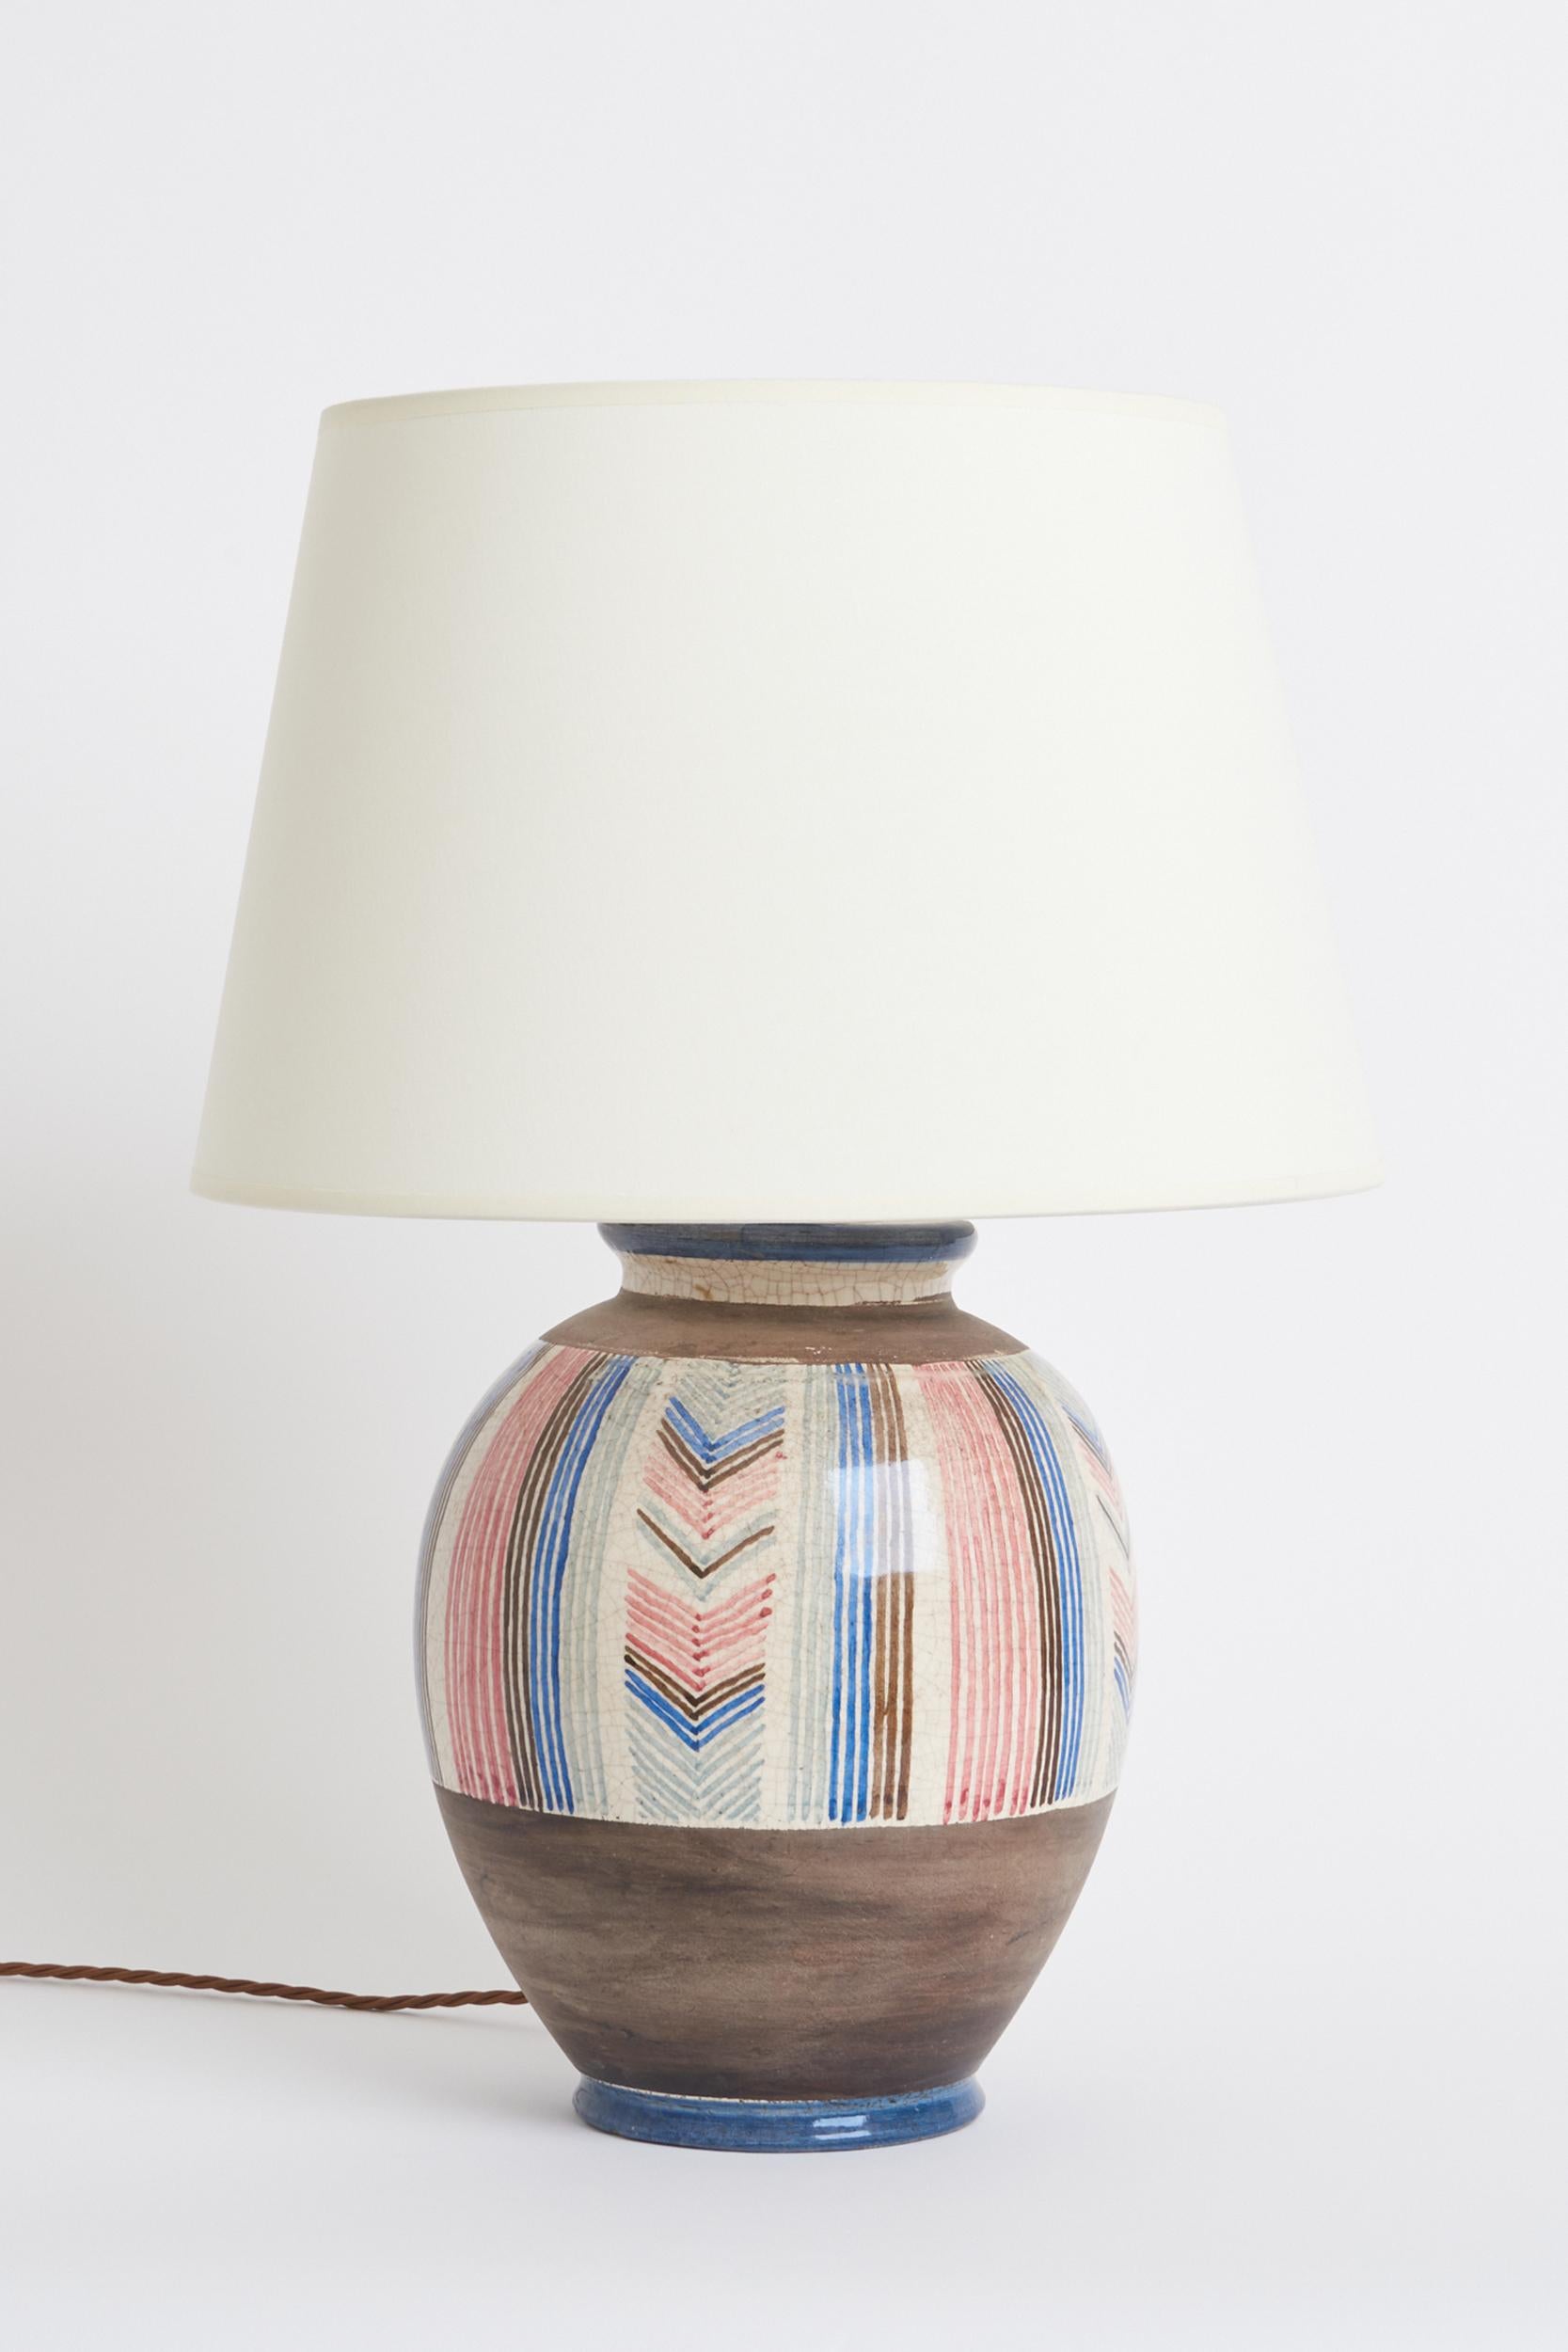 A large Art Deco polychrome ceramic table lamp by Jean-Jacques Lachenal (1881-1941). 
Hand painted, one of a kind. Signed. 
France, 1920s.
With the shade: 58 cm high by 41 cm diameter
Lamp base only: 37 cm high by 24 cm diameter